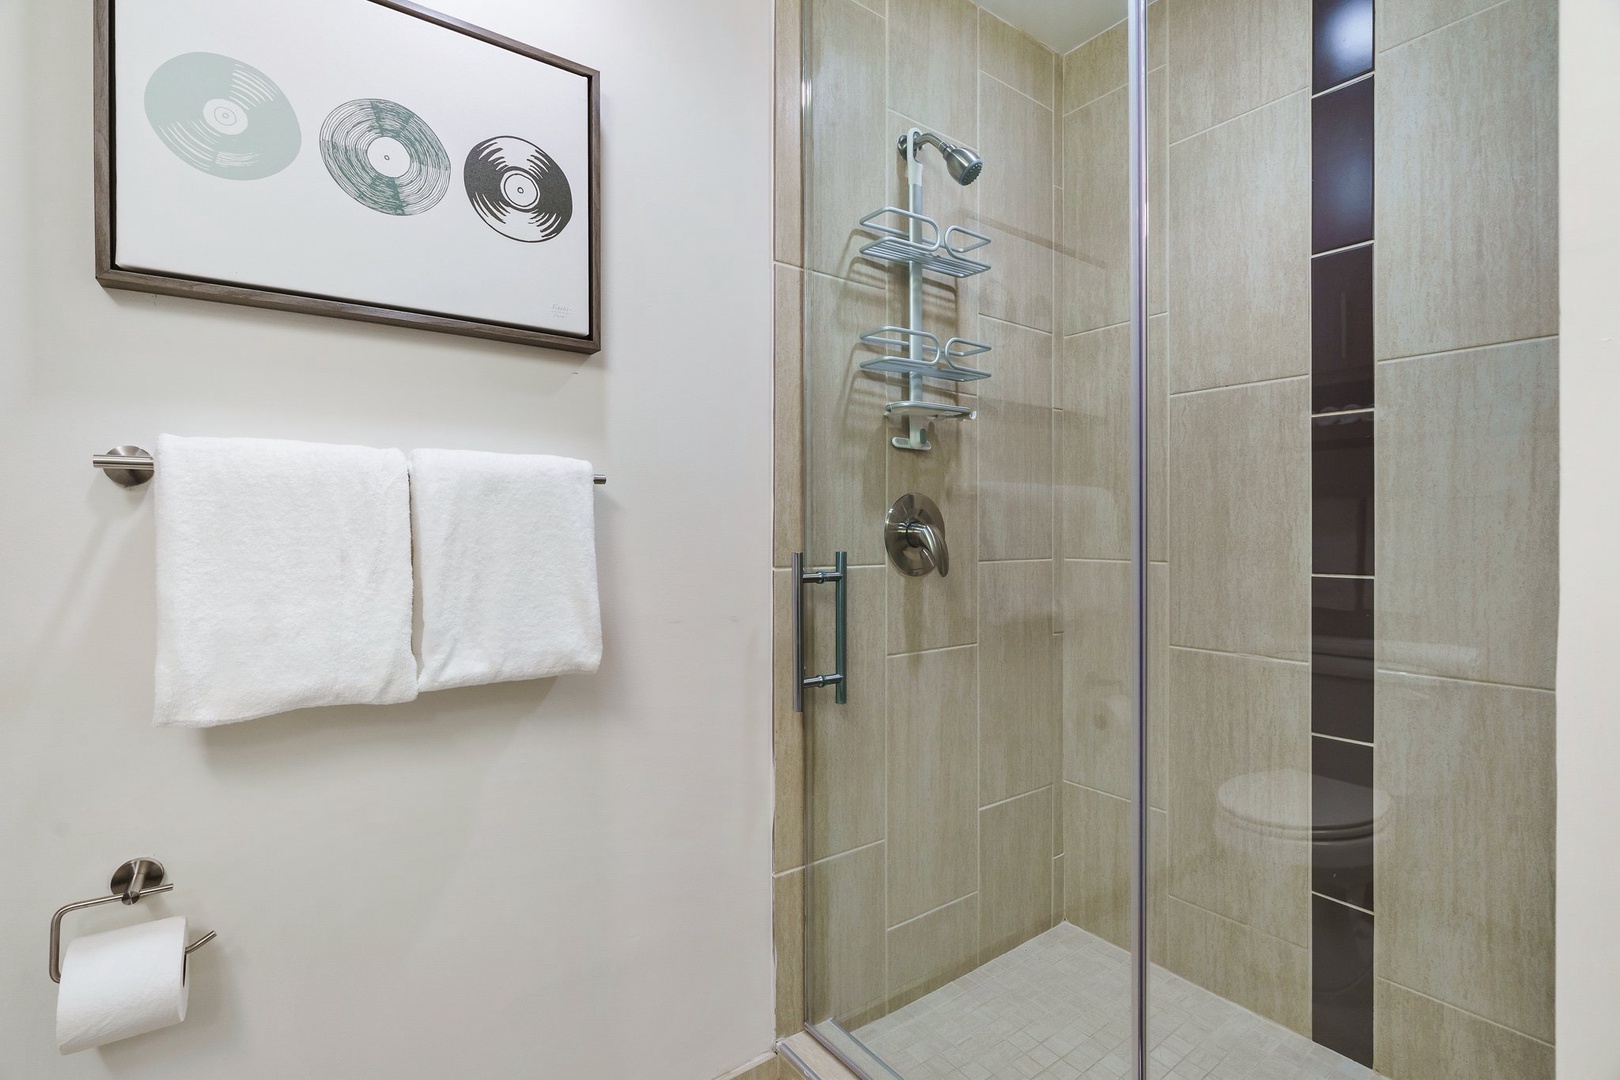 Start your day refreshed in the walk-in shower with modern fixtures.